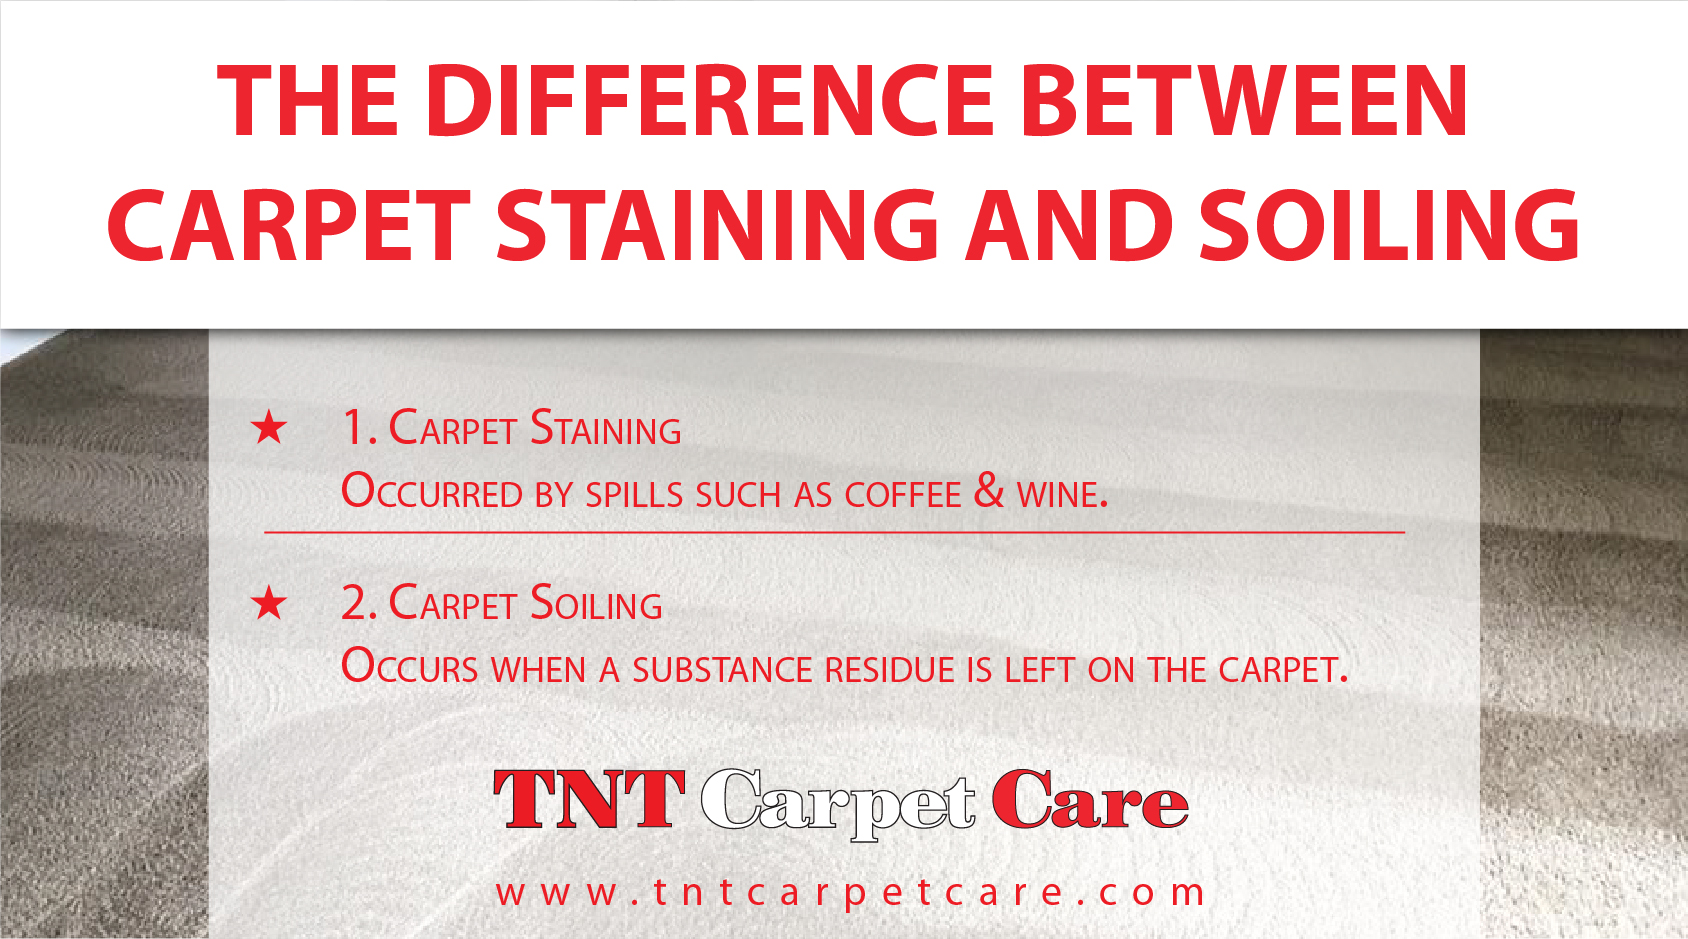 The Difference Between Carpet Staining and Soiling